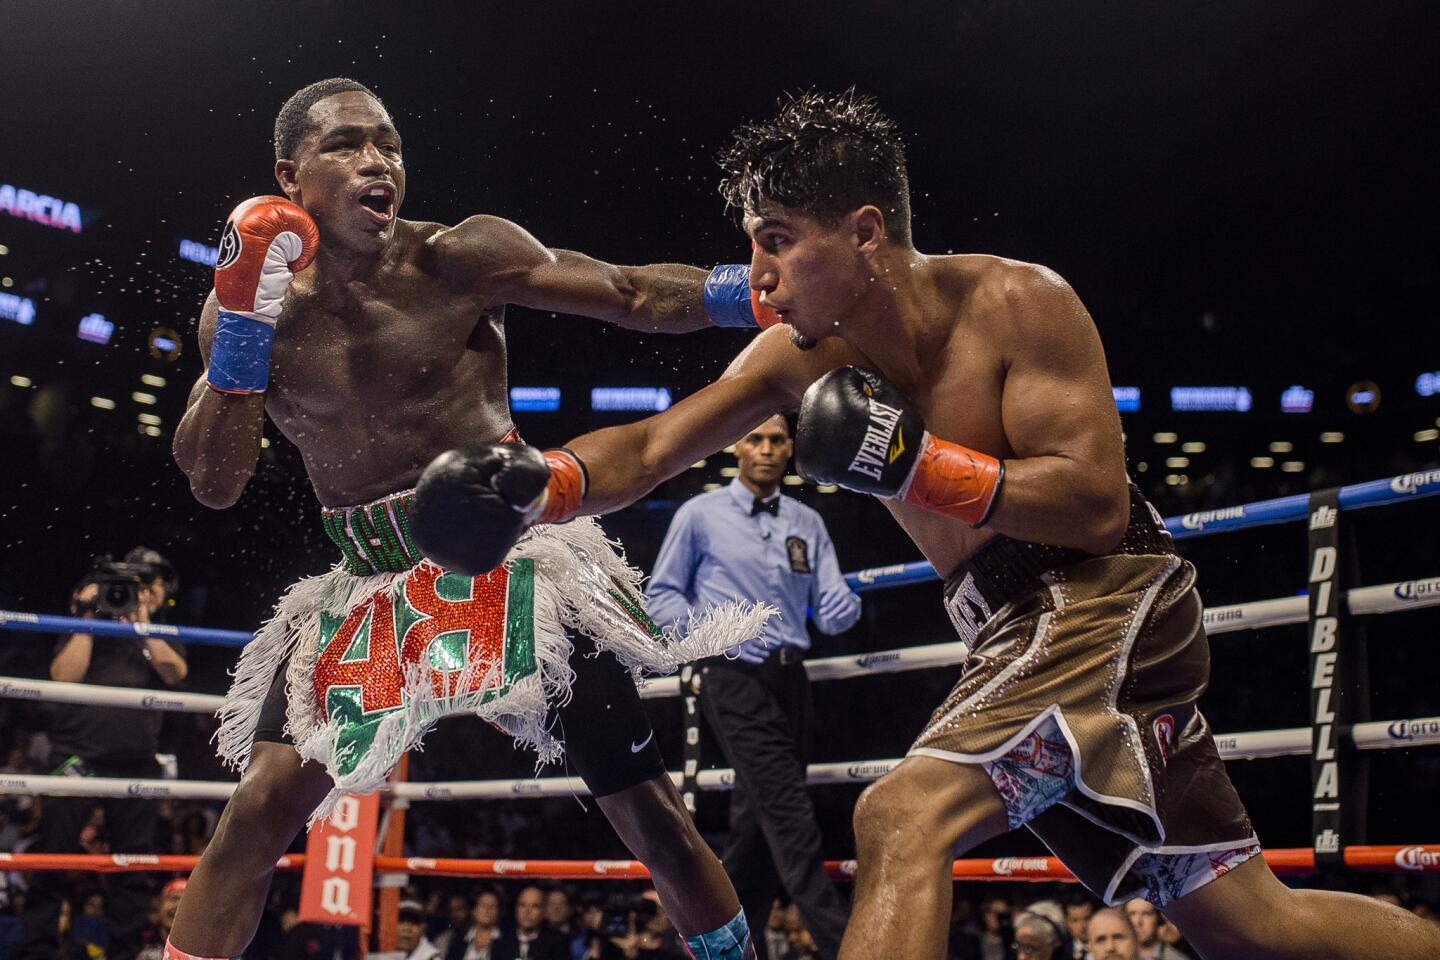 FILE - In this May 3, 2014, file photo, boxer Adrien Broner reacts during his WBA super lightweight title fight against Carlos Molina in Las Vegas. Broner has another chance - maybe his last - to prove he can still be one of boxing's brightest stars. But he has to beat undefeated Mikey Garcia, who moves up to 140 pounds for their bout Saturday, July 29, 2017, in Brooklyn, N.Y. (AP Photo/Isaac Brekken, File)